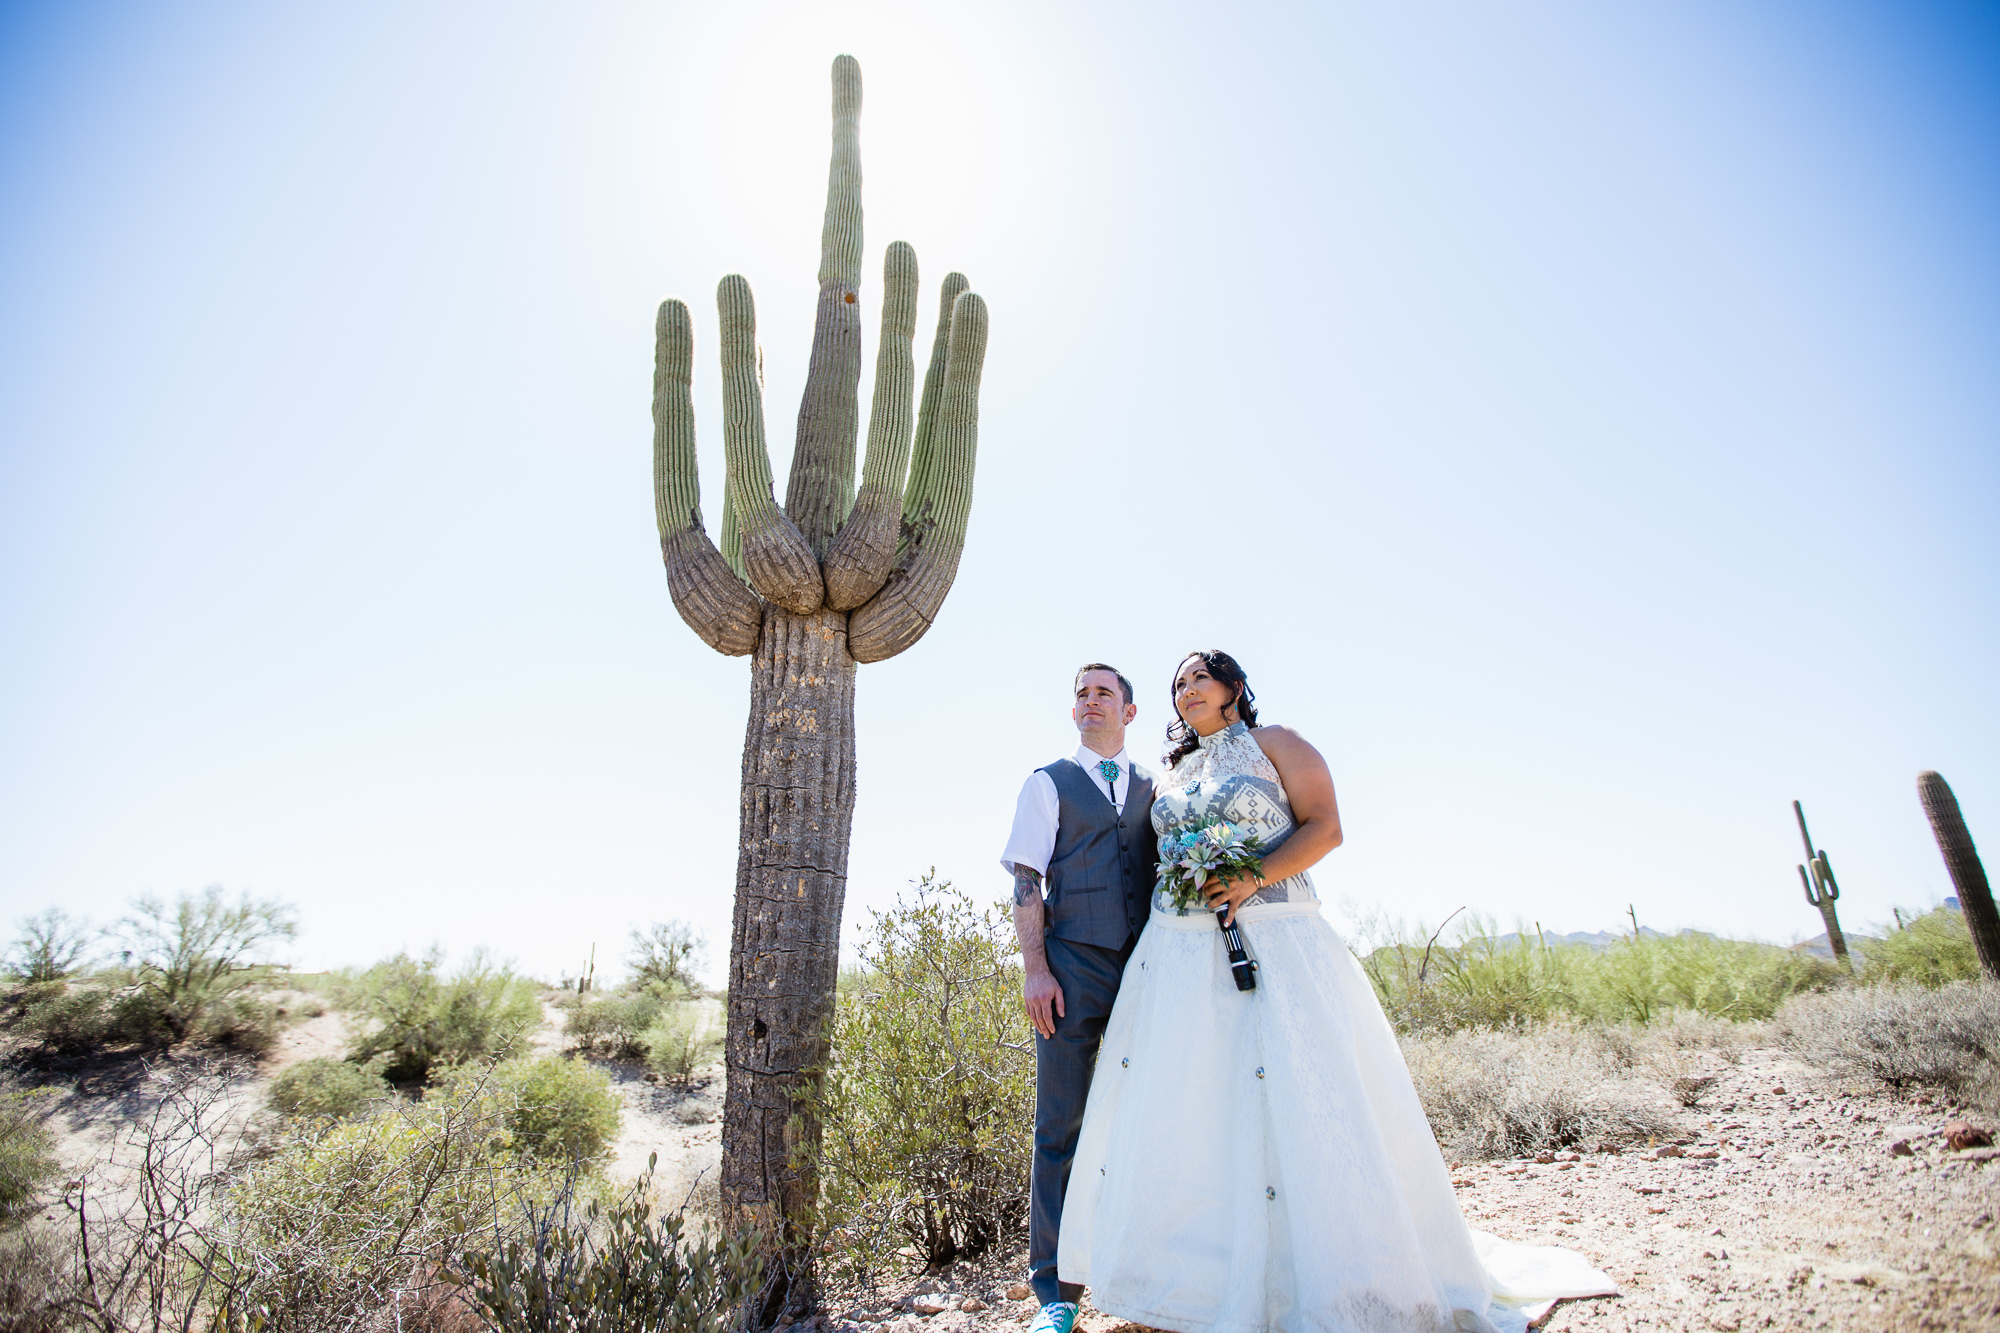 Tattooed Irish groom and Navajo bride in front of a Saguaro cactus at their Lost Dutchman State Park Turquoise Star Wars wedding by Phoenix wedding photographers PMA Photography.